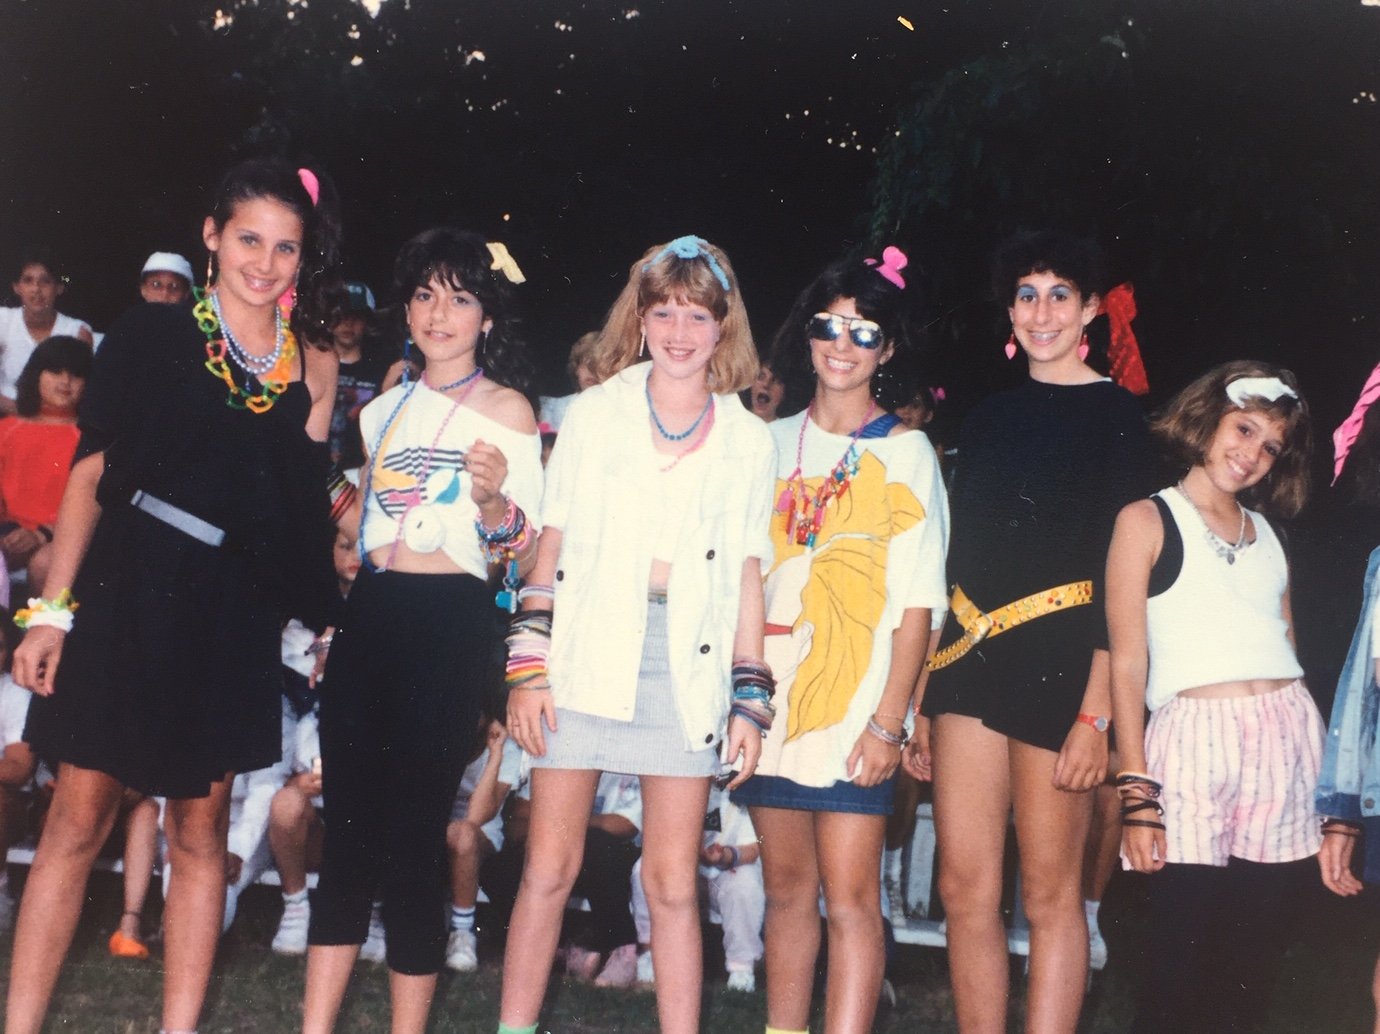  Vintage 1985—from Jill Ettinger. “Madonna Day”—when every camper on girls side dressed up as Madonna for evening activity. 